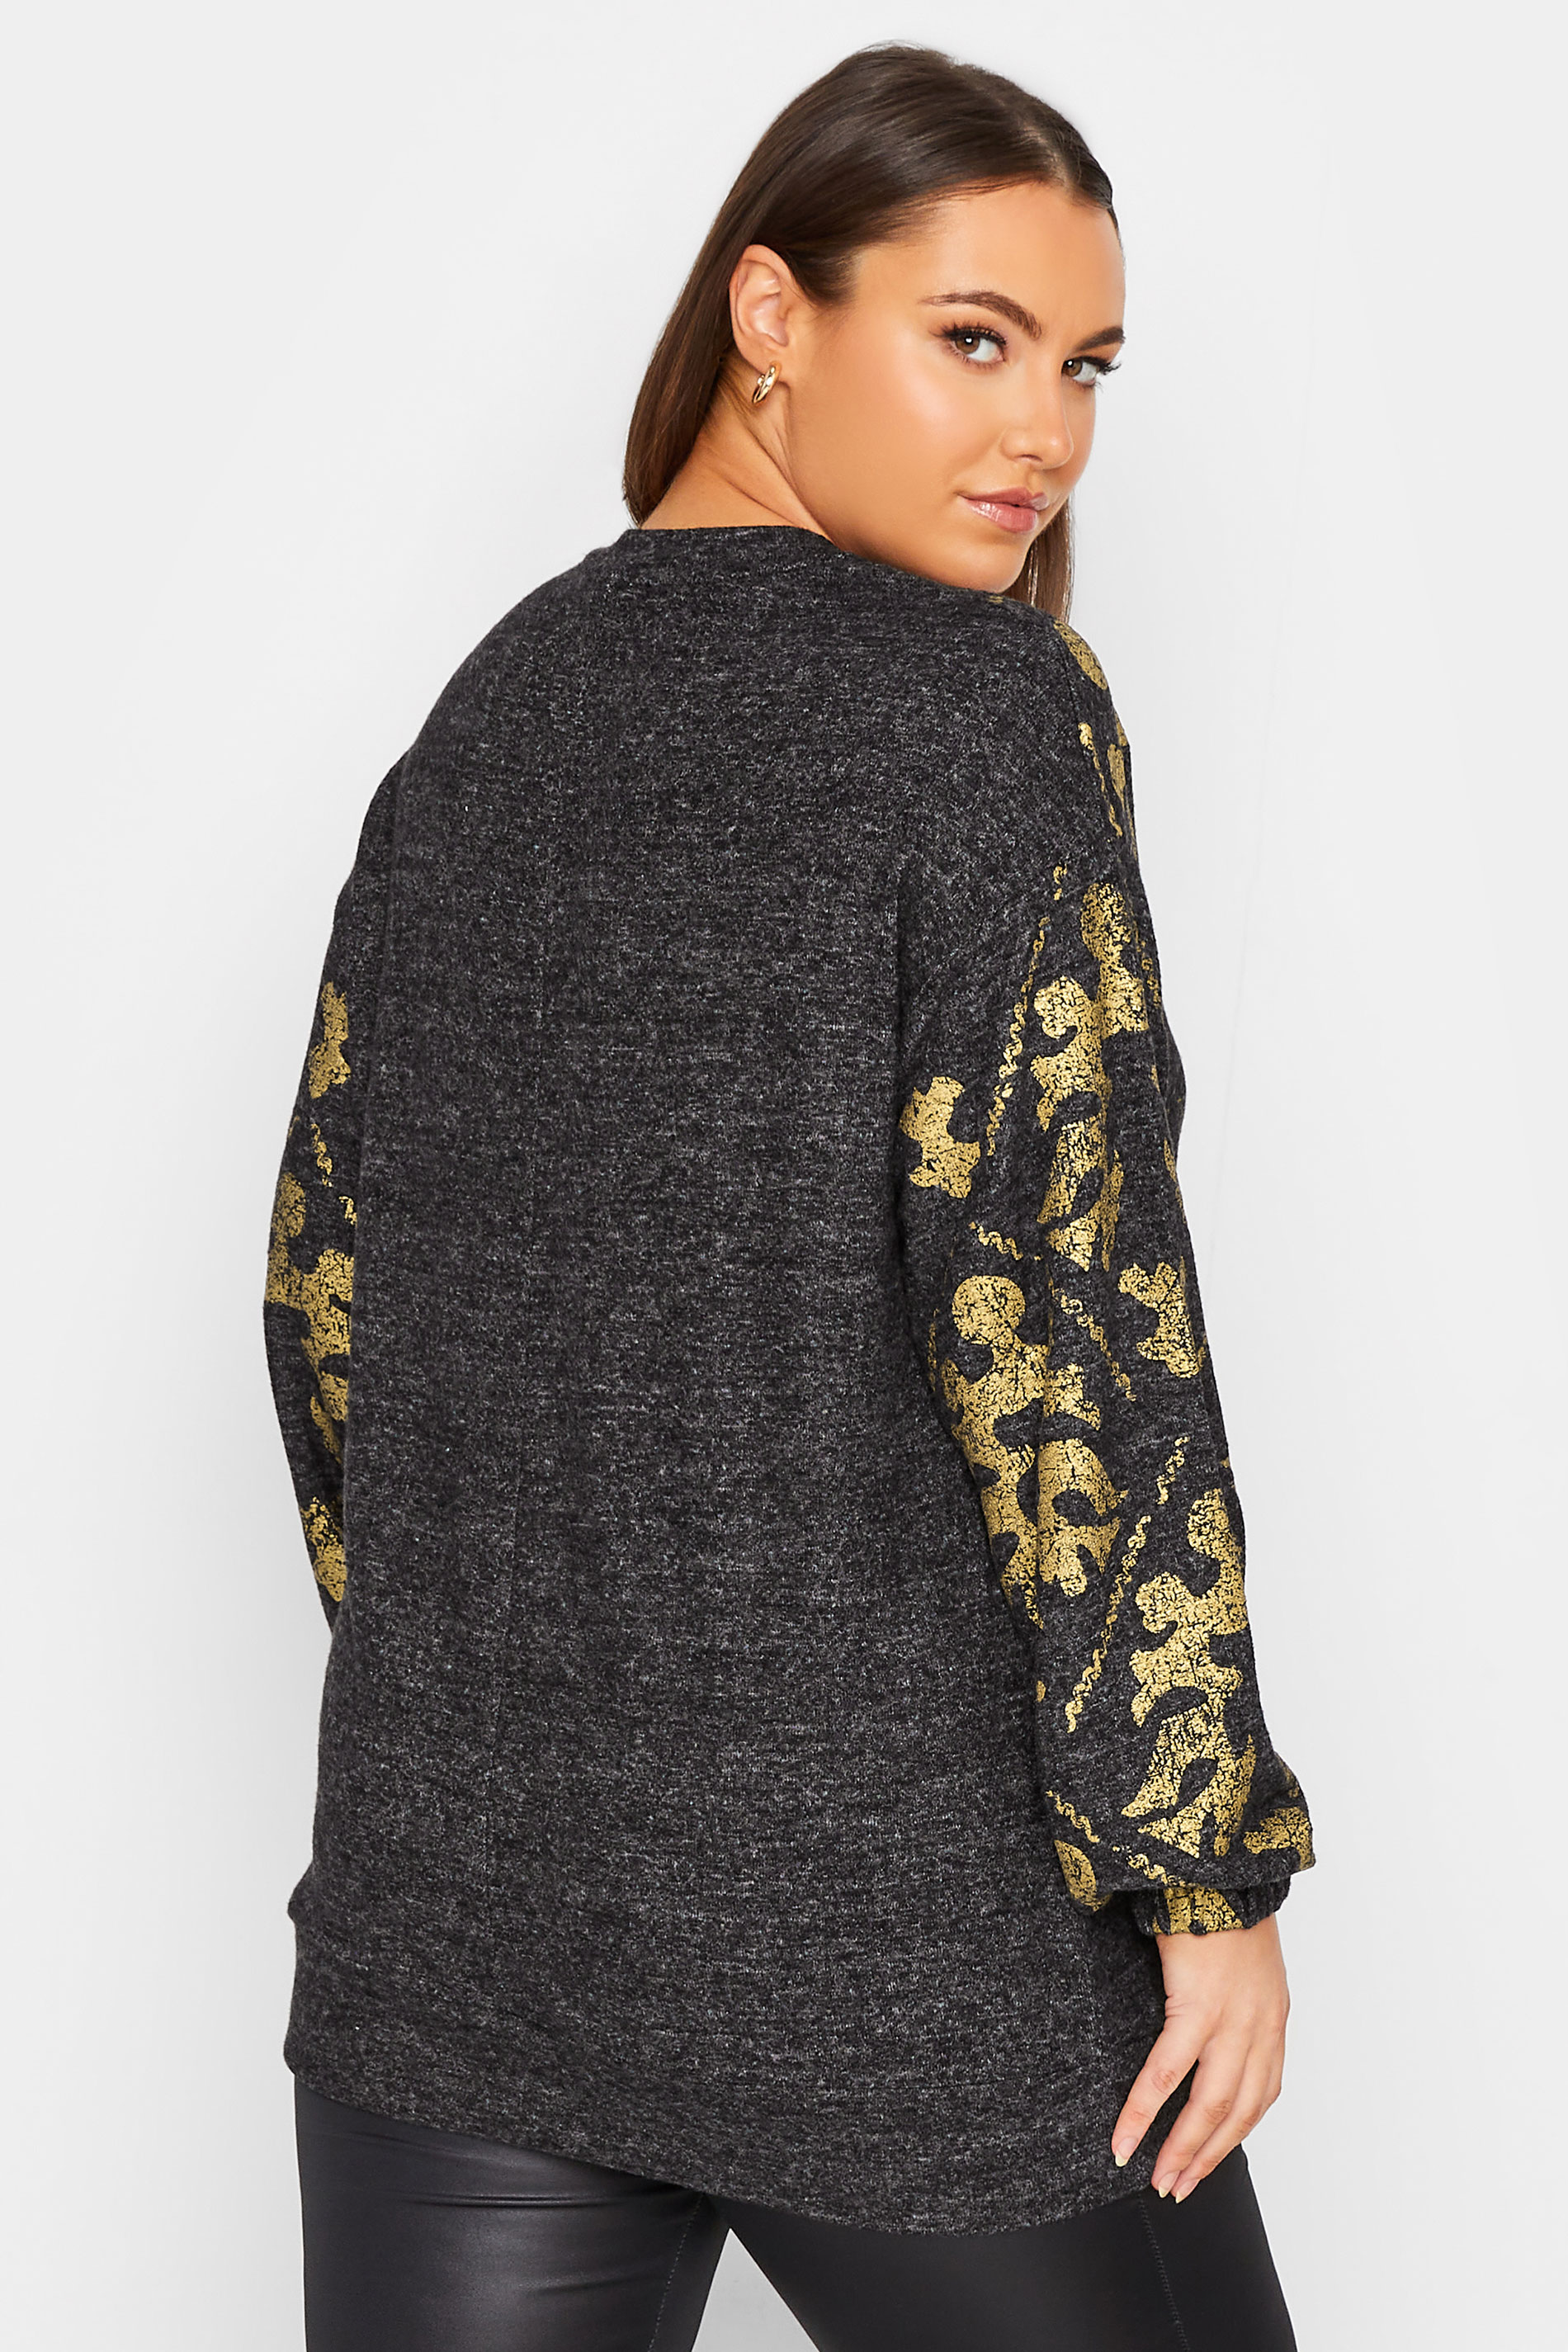 YOURS LUXURY Plus Size Curve Charcoal Grey & Gold Filigree Print Soft Touch Jumper 3